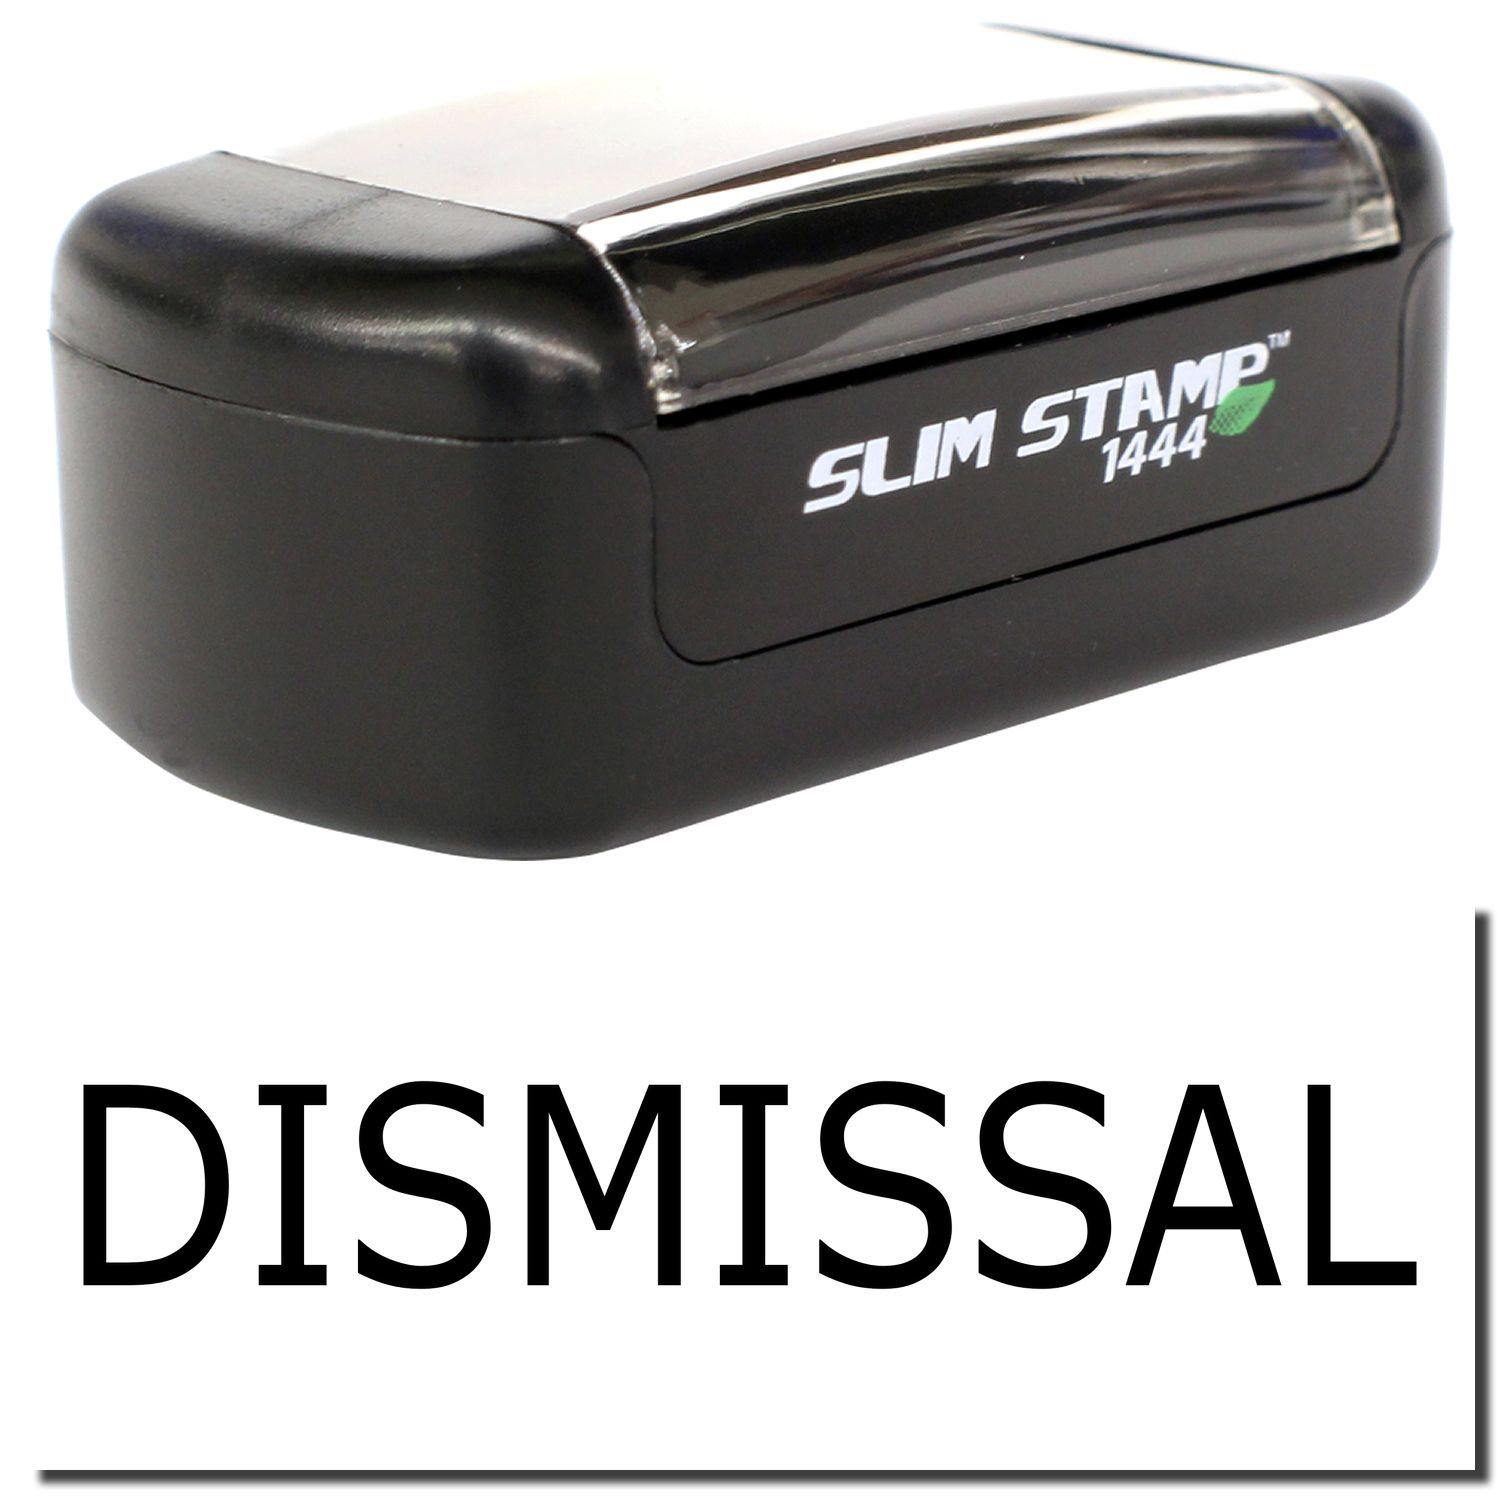 A stock office pre-inked stamp with a stamped image showing how the text "DISMISSAL" is displayed after stamping.